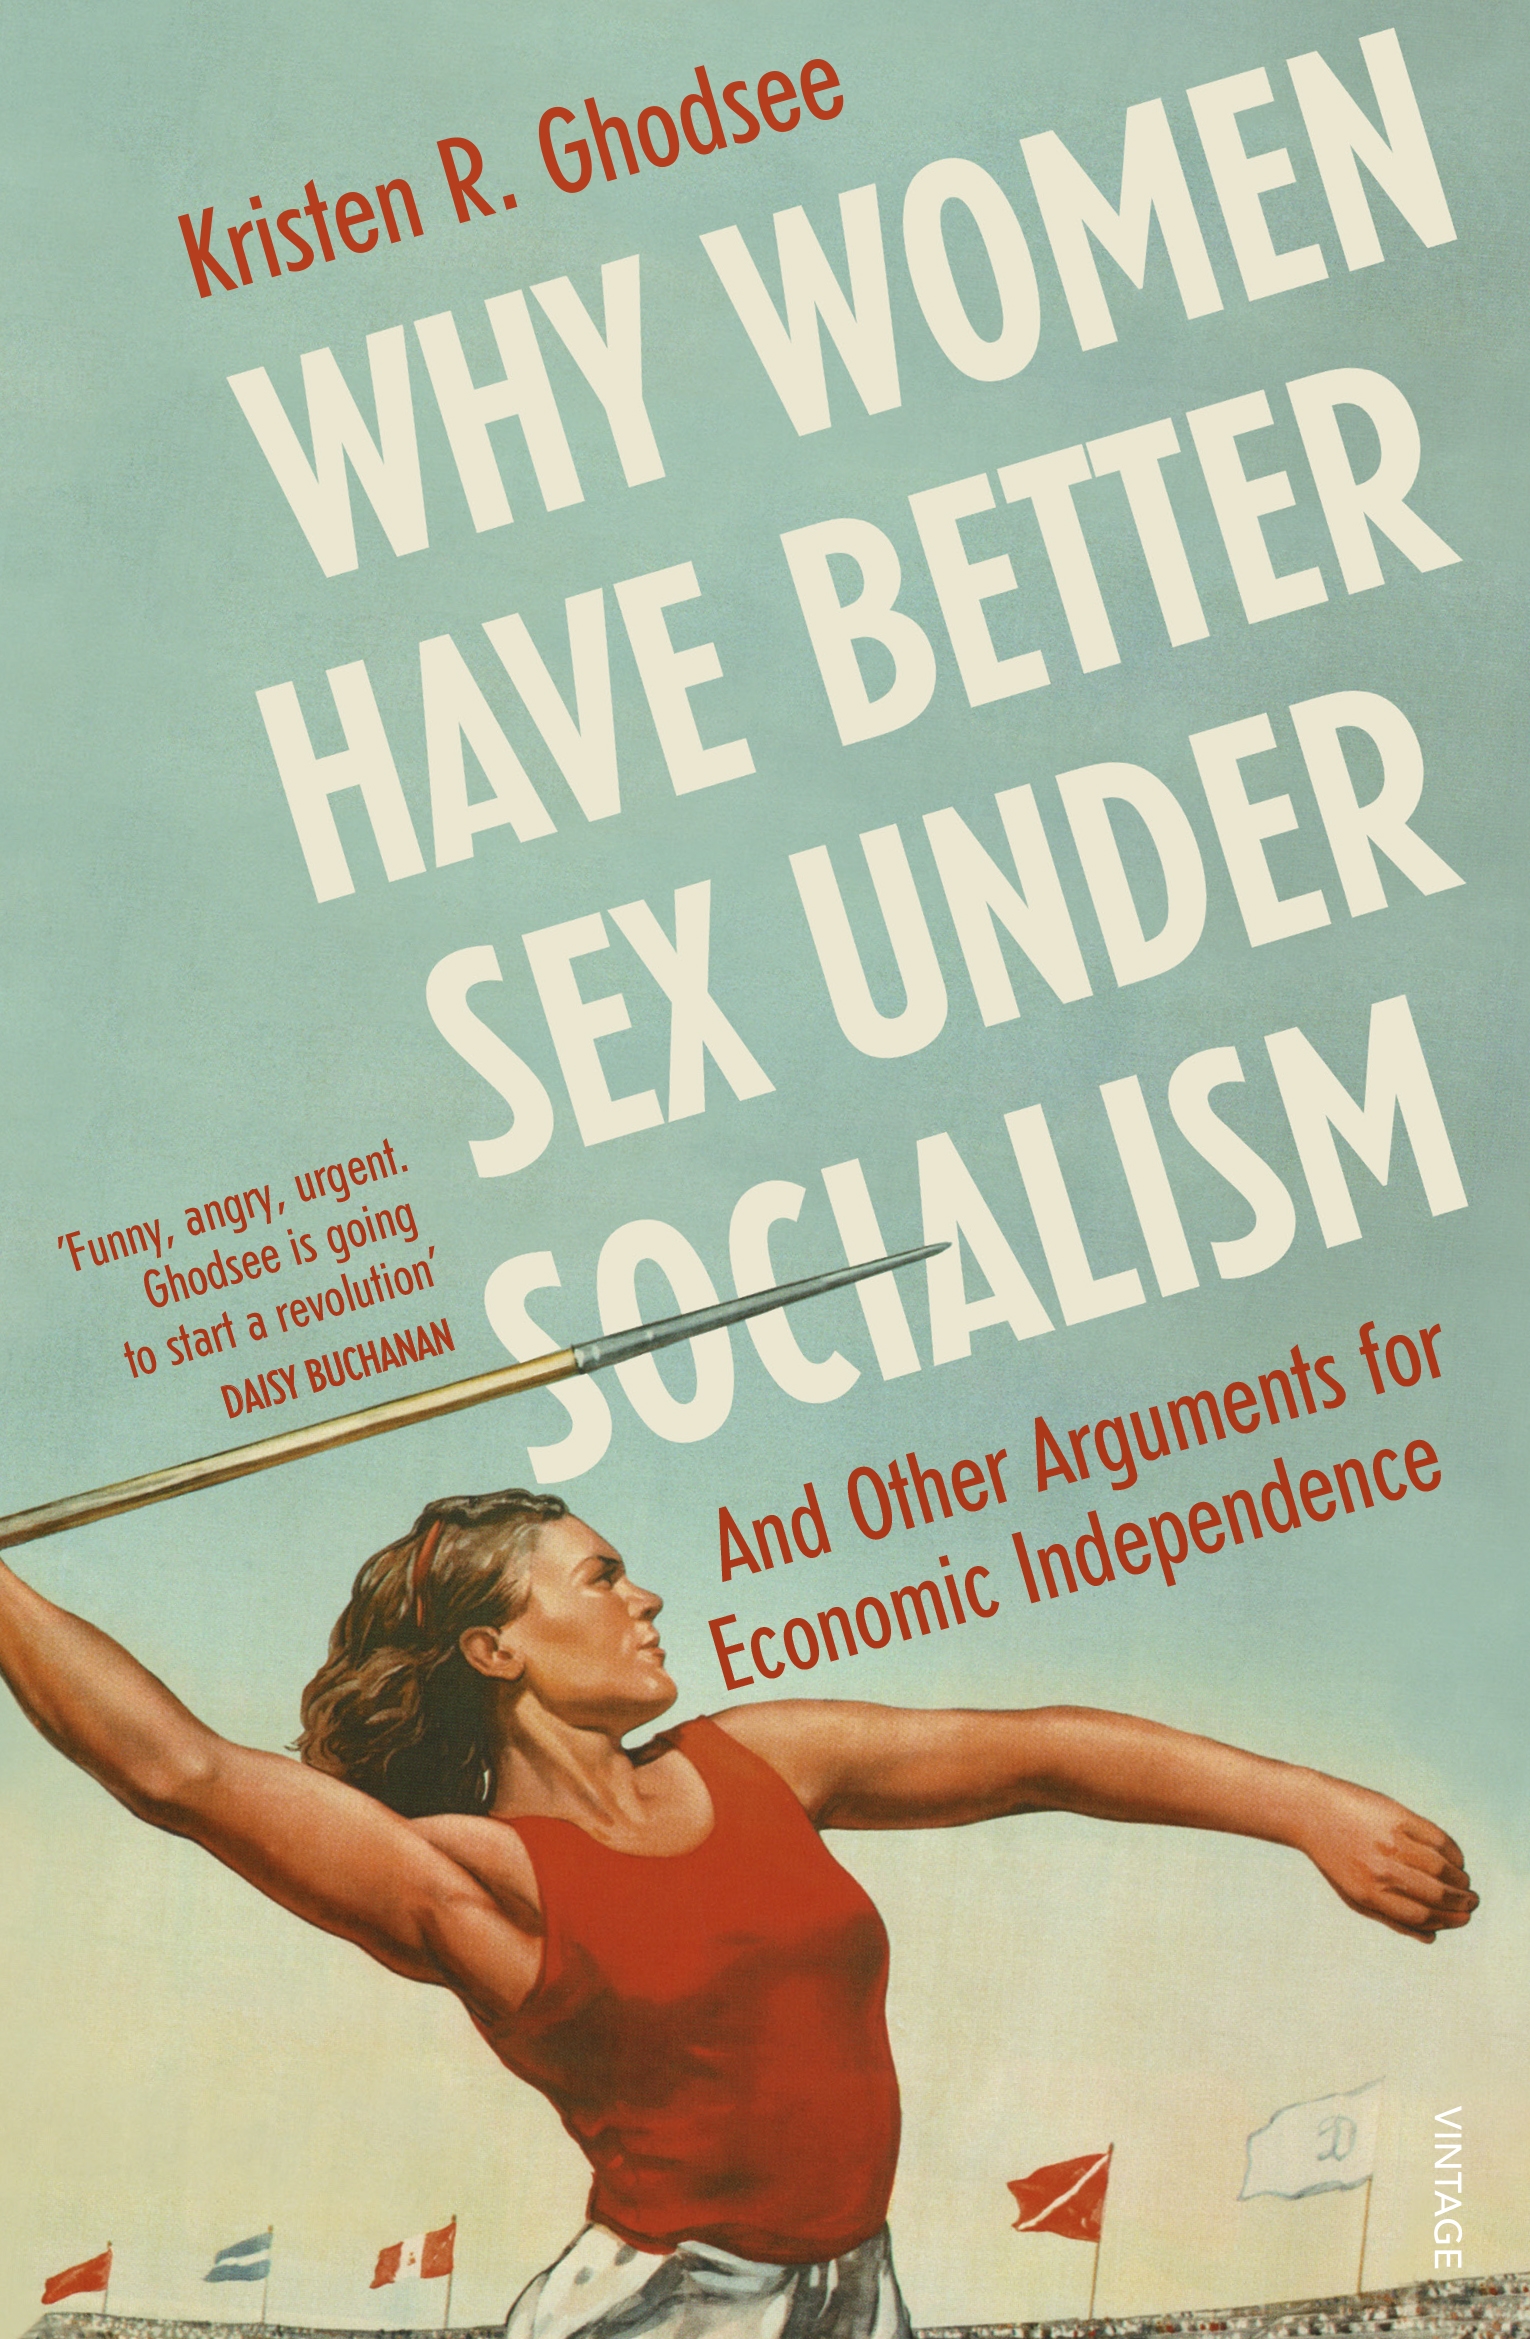 Why Women Have Better Sex Under Socialism By Kristen Ghodsee Penguin 6207